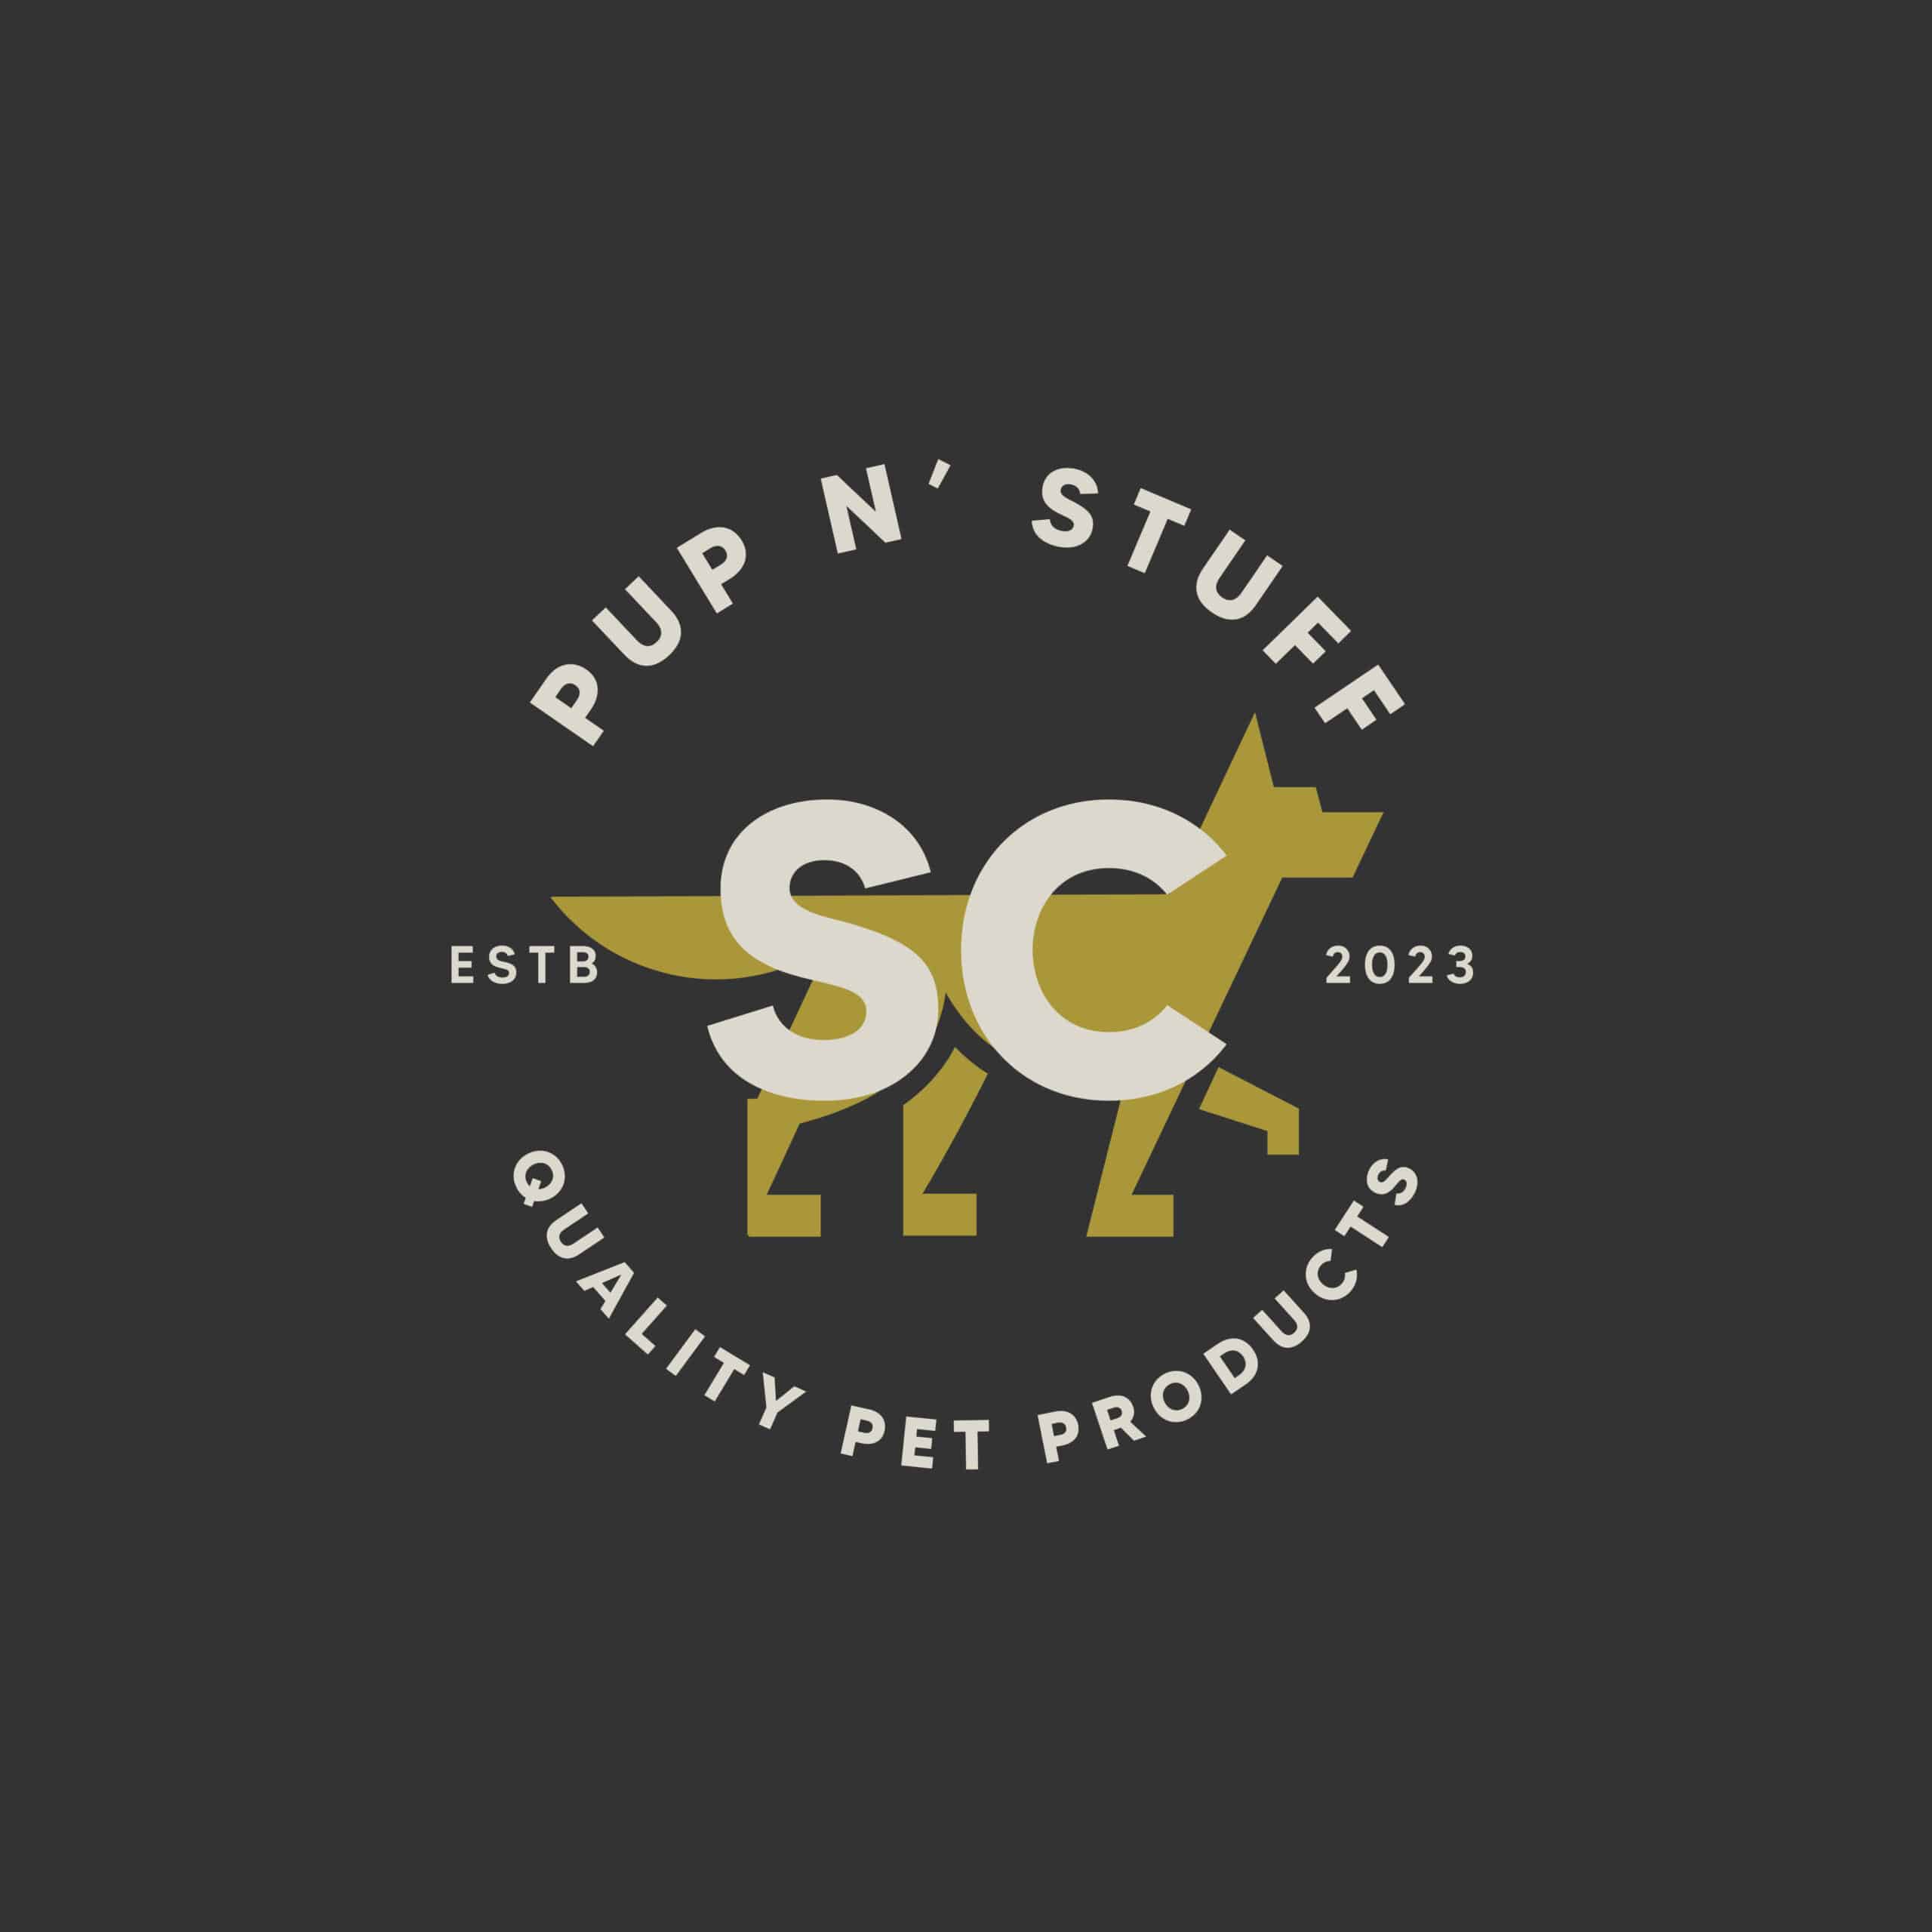 SC Pup N Stuff Logo Design of a dog and the moon Brand Design by Stellen Design branding agency